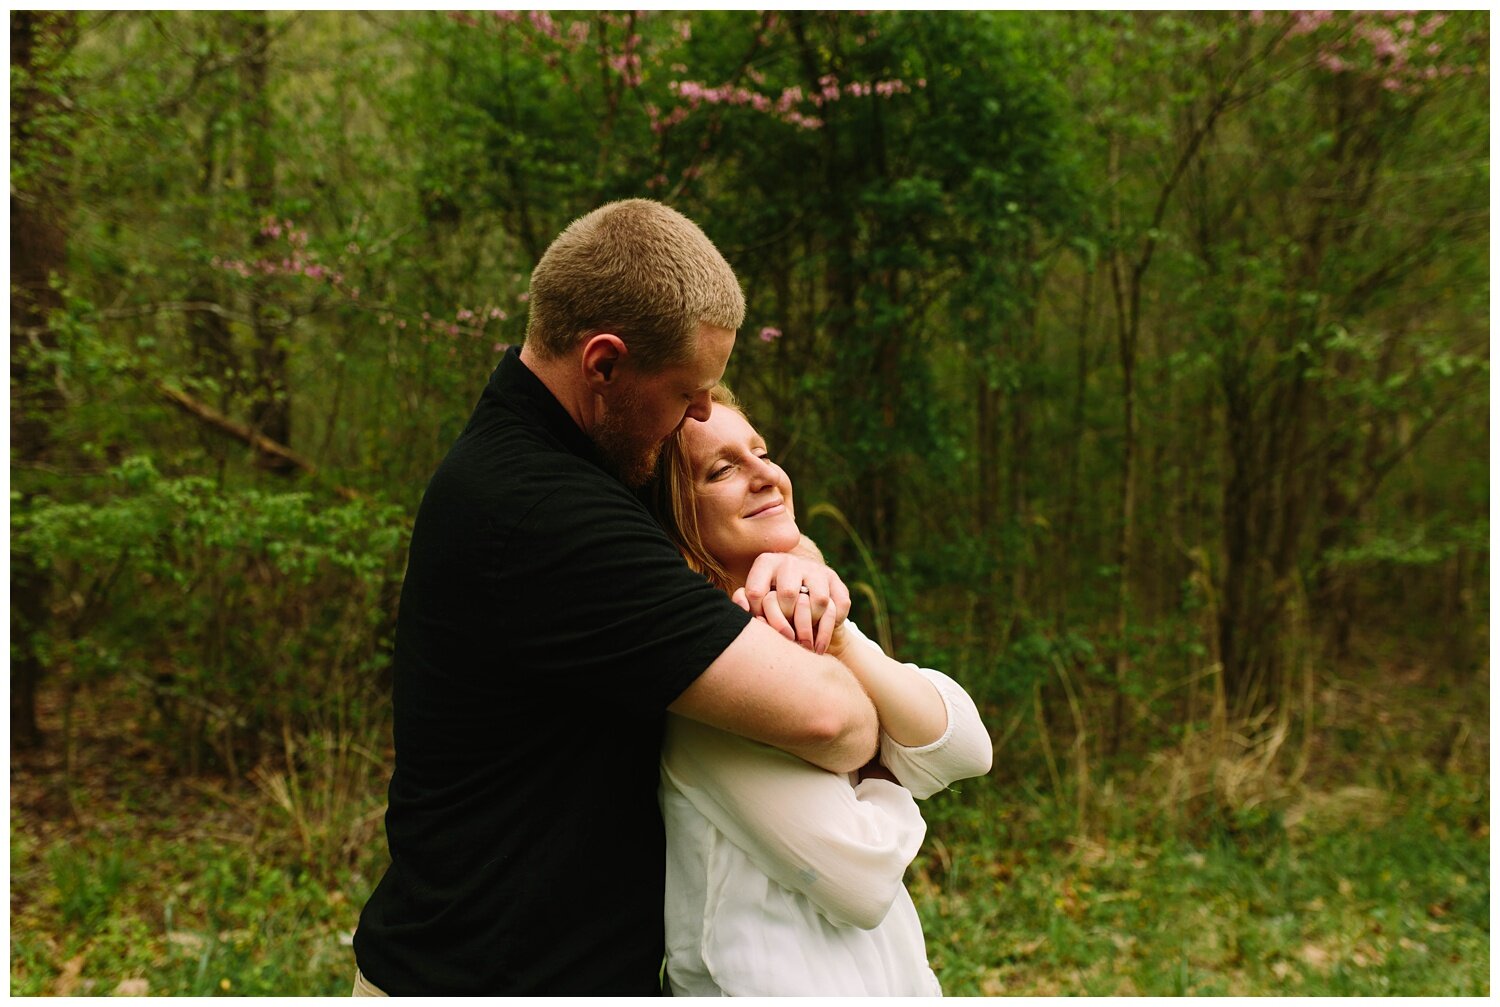 Kendra_Farris_Photography_Red_River_Gorge_Engagement_Photos-23.jpg